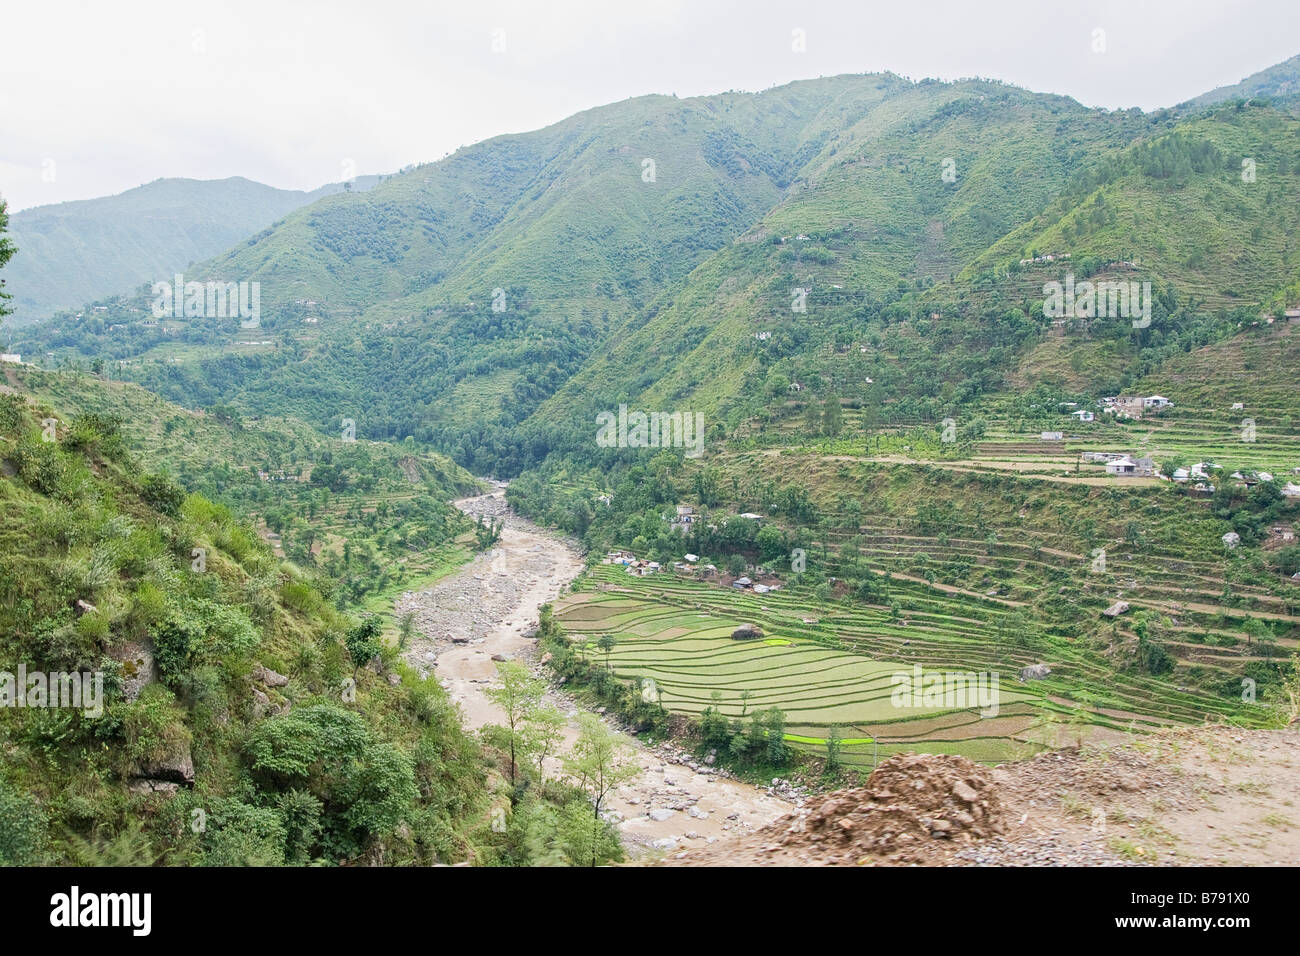 Green mountains and fields along the Karakoram highway in Pakistan Stock Photo